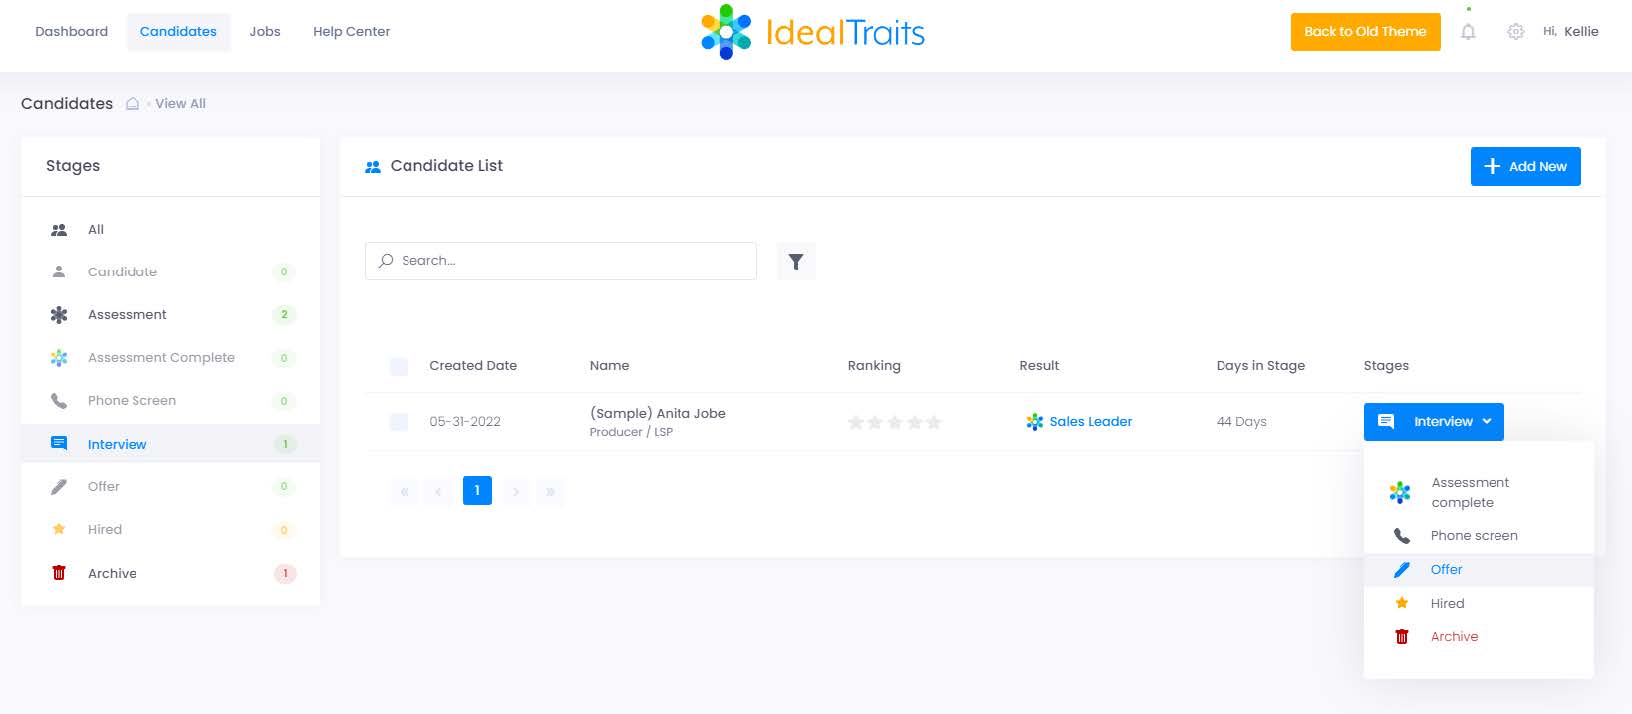 IdealTraits Dashboard - Hiring Stages